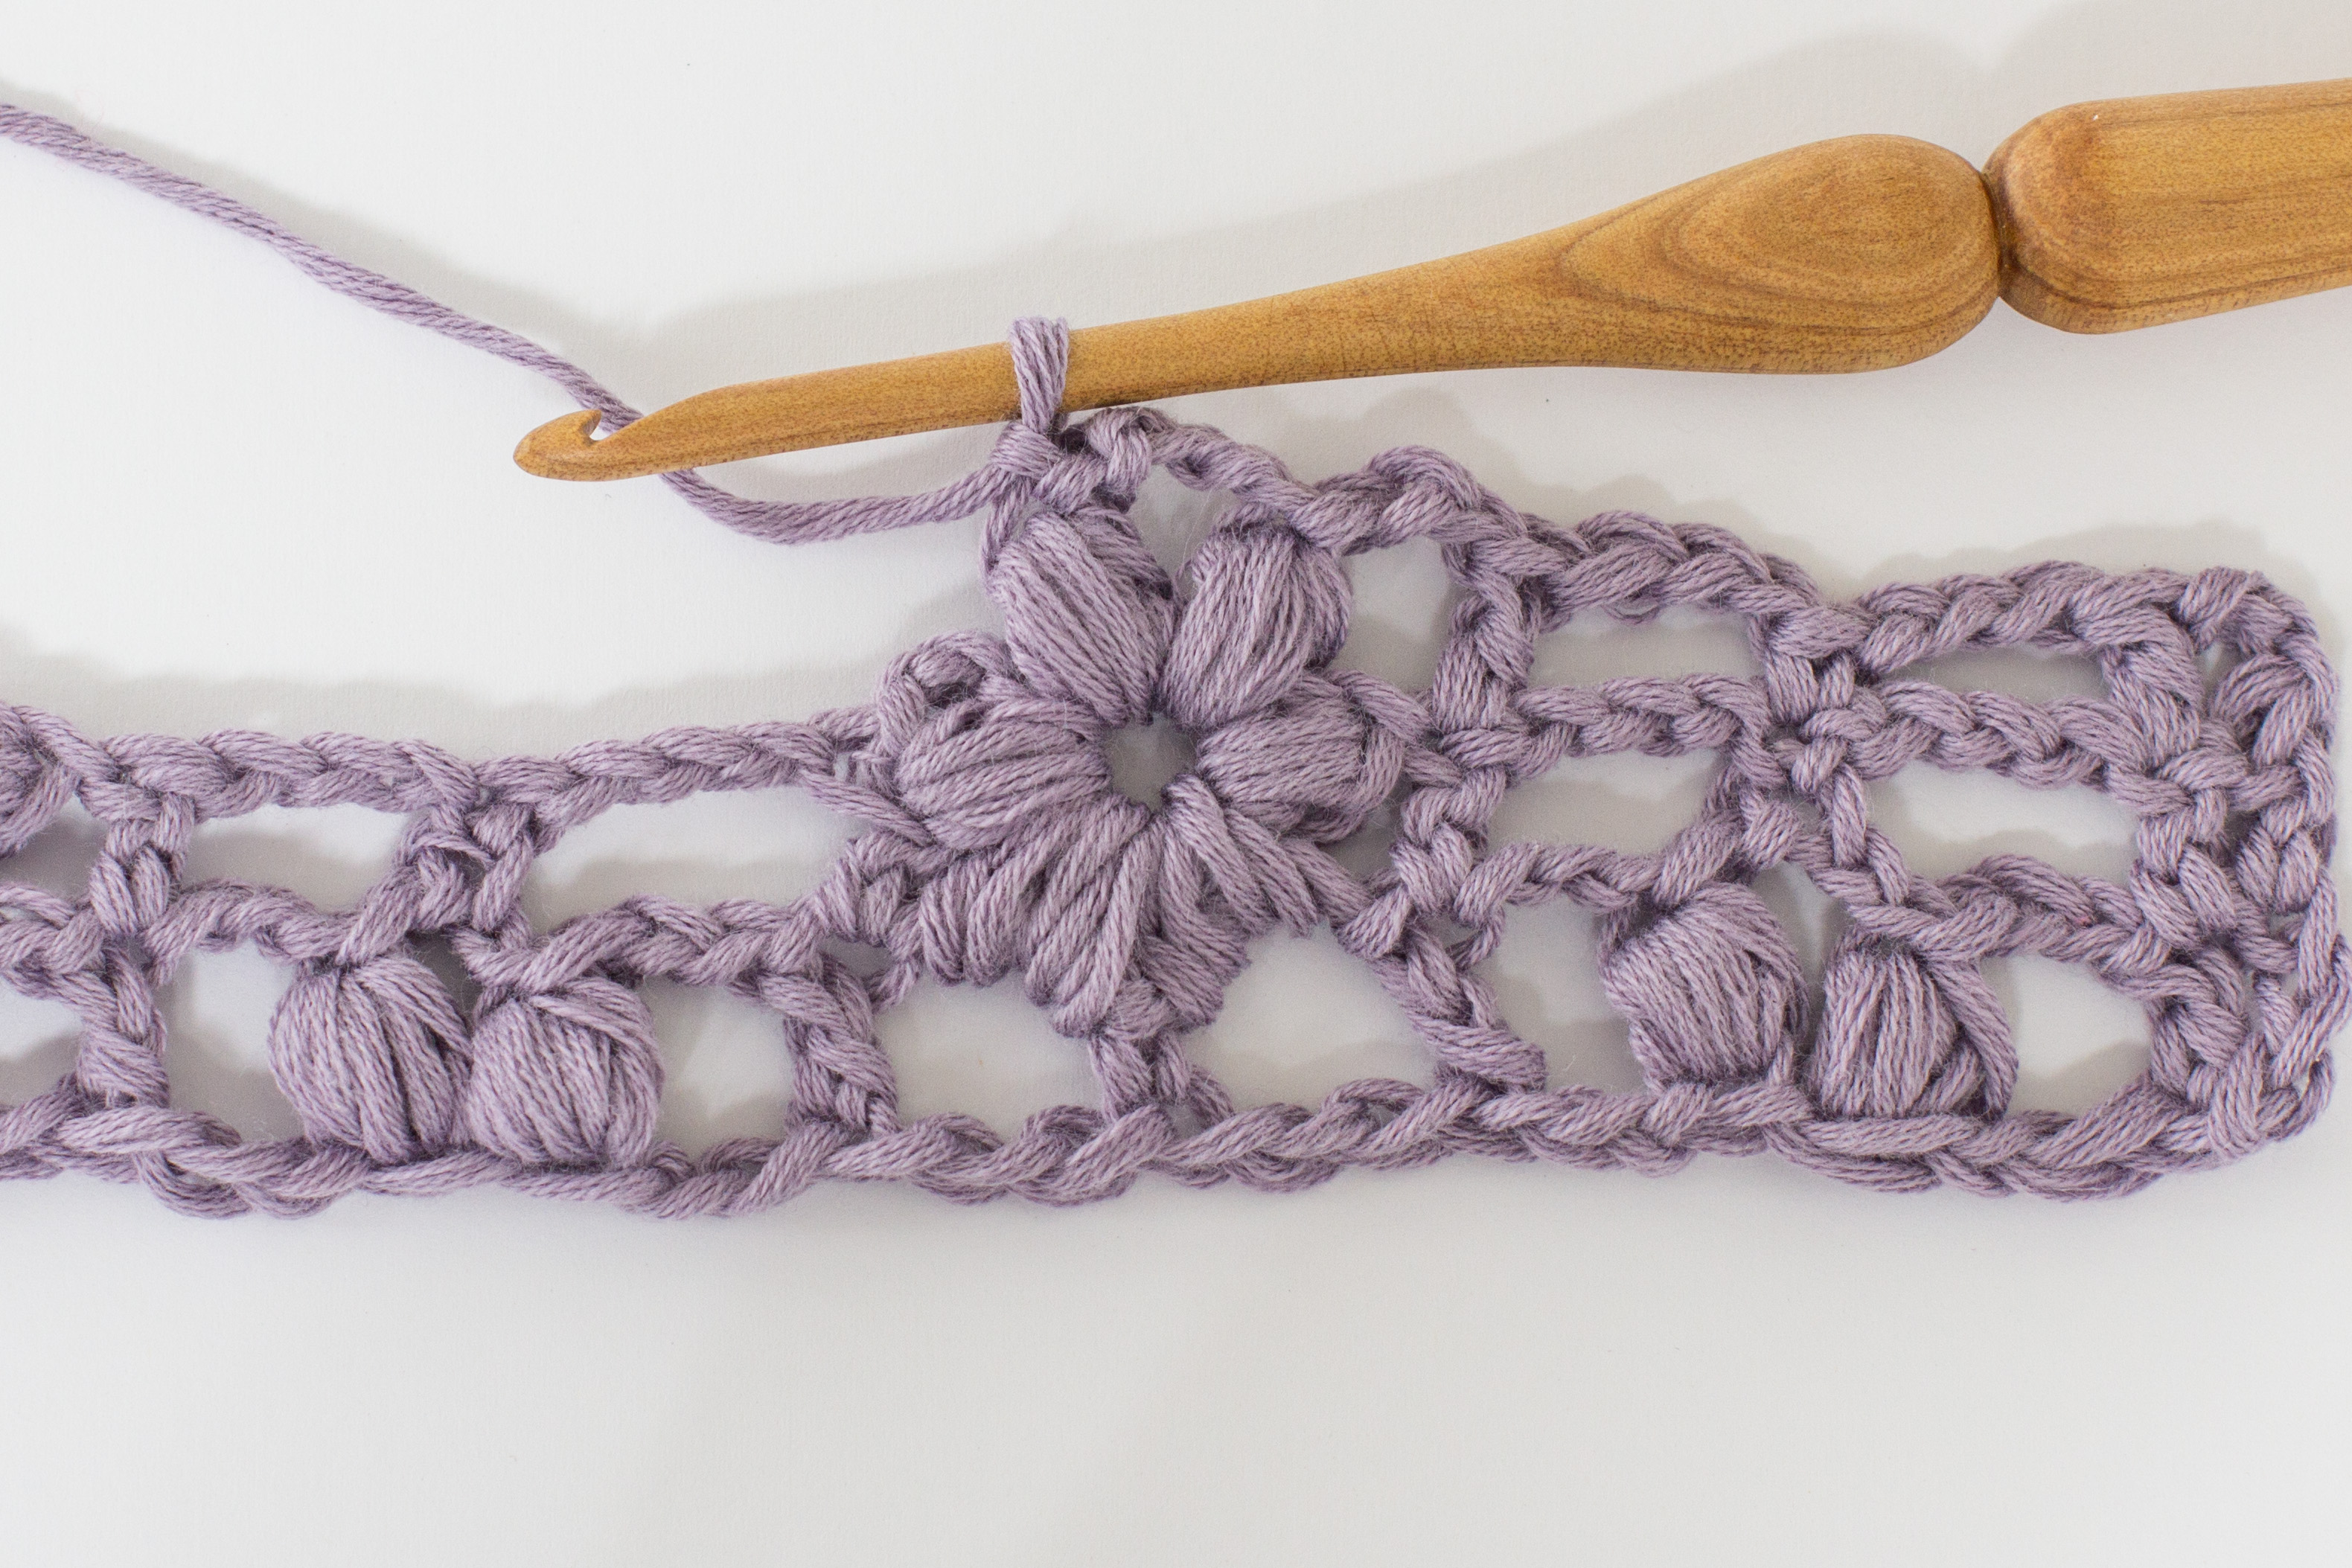 How To Crochet The Flower Puff Stitch